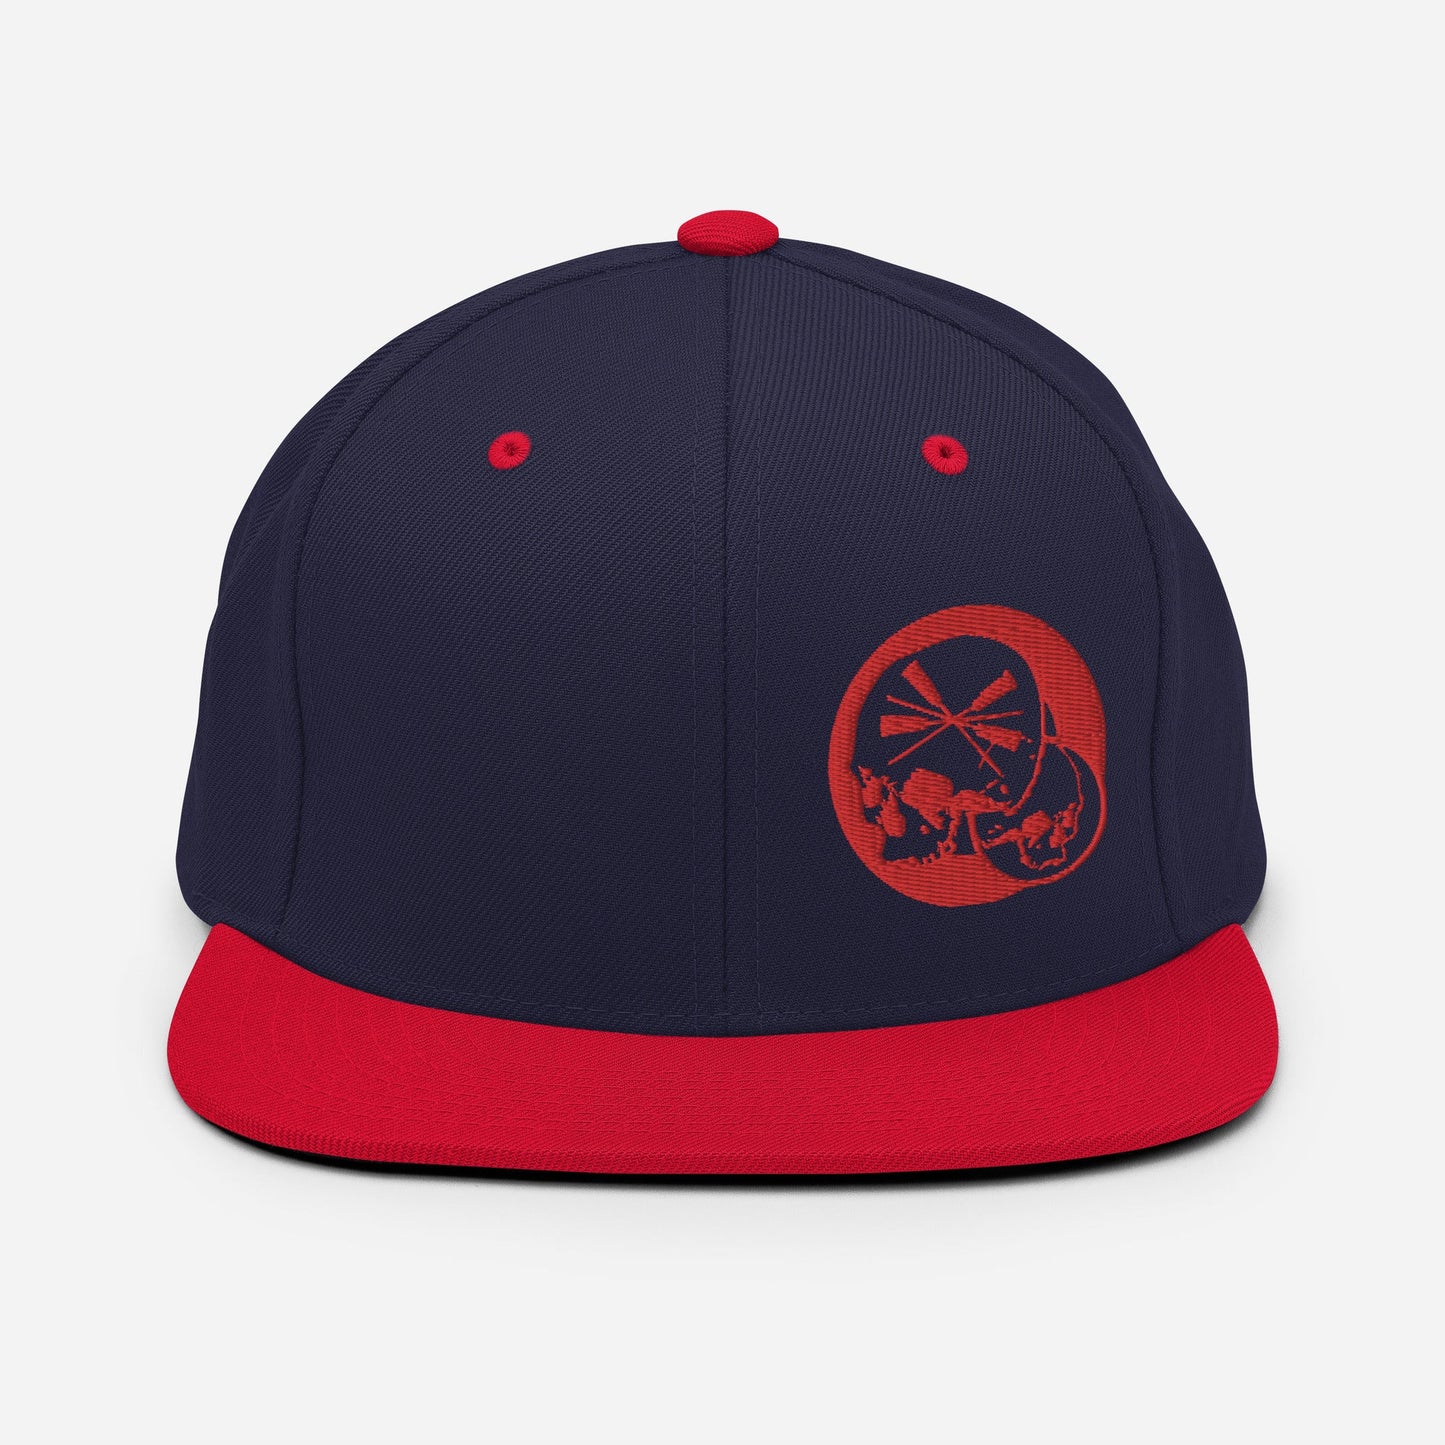 Casquette Snapback Brodé rouge The Needles Factory Free Shipping - The Needles Factory